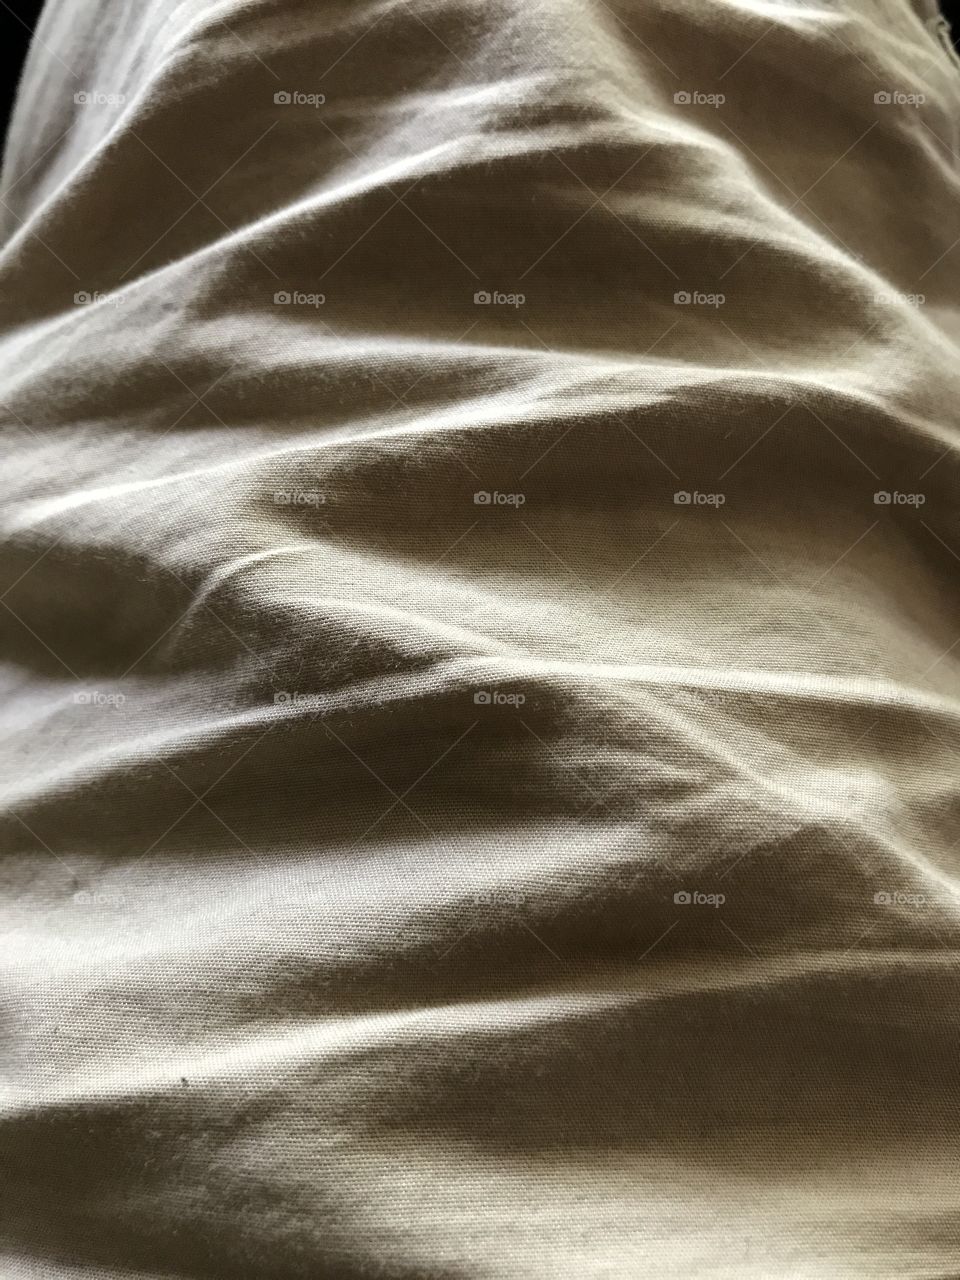 Texture of the shorts I'm wearing.